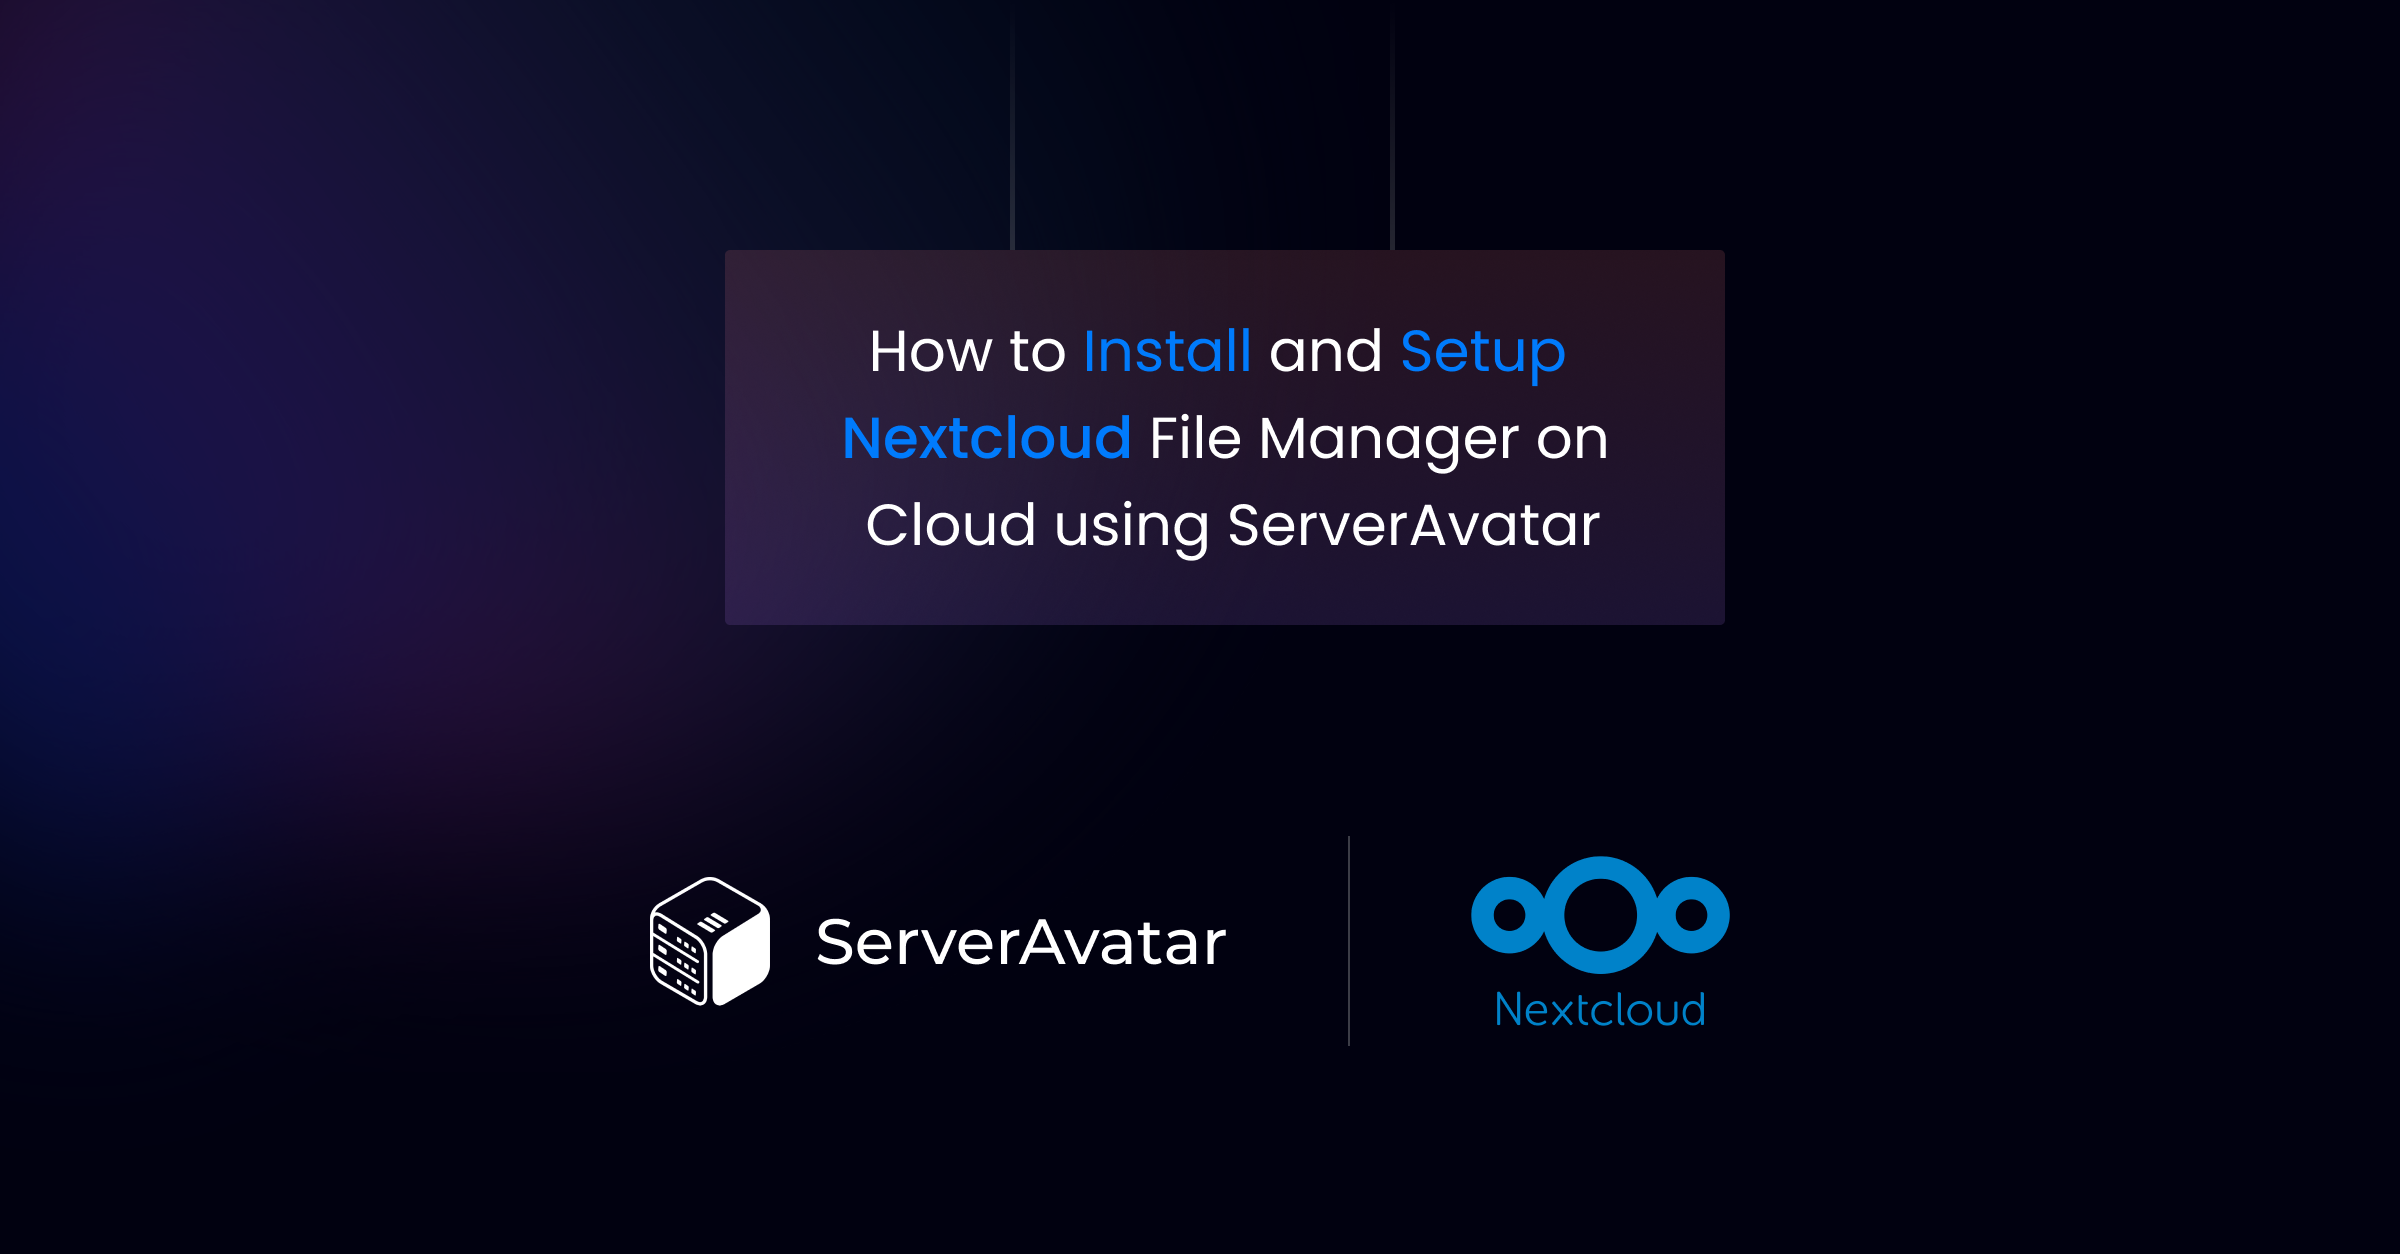 How to Install and Setup Nextcloud File Manager on cloud using ServerAvatar